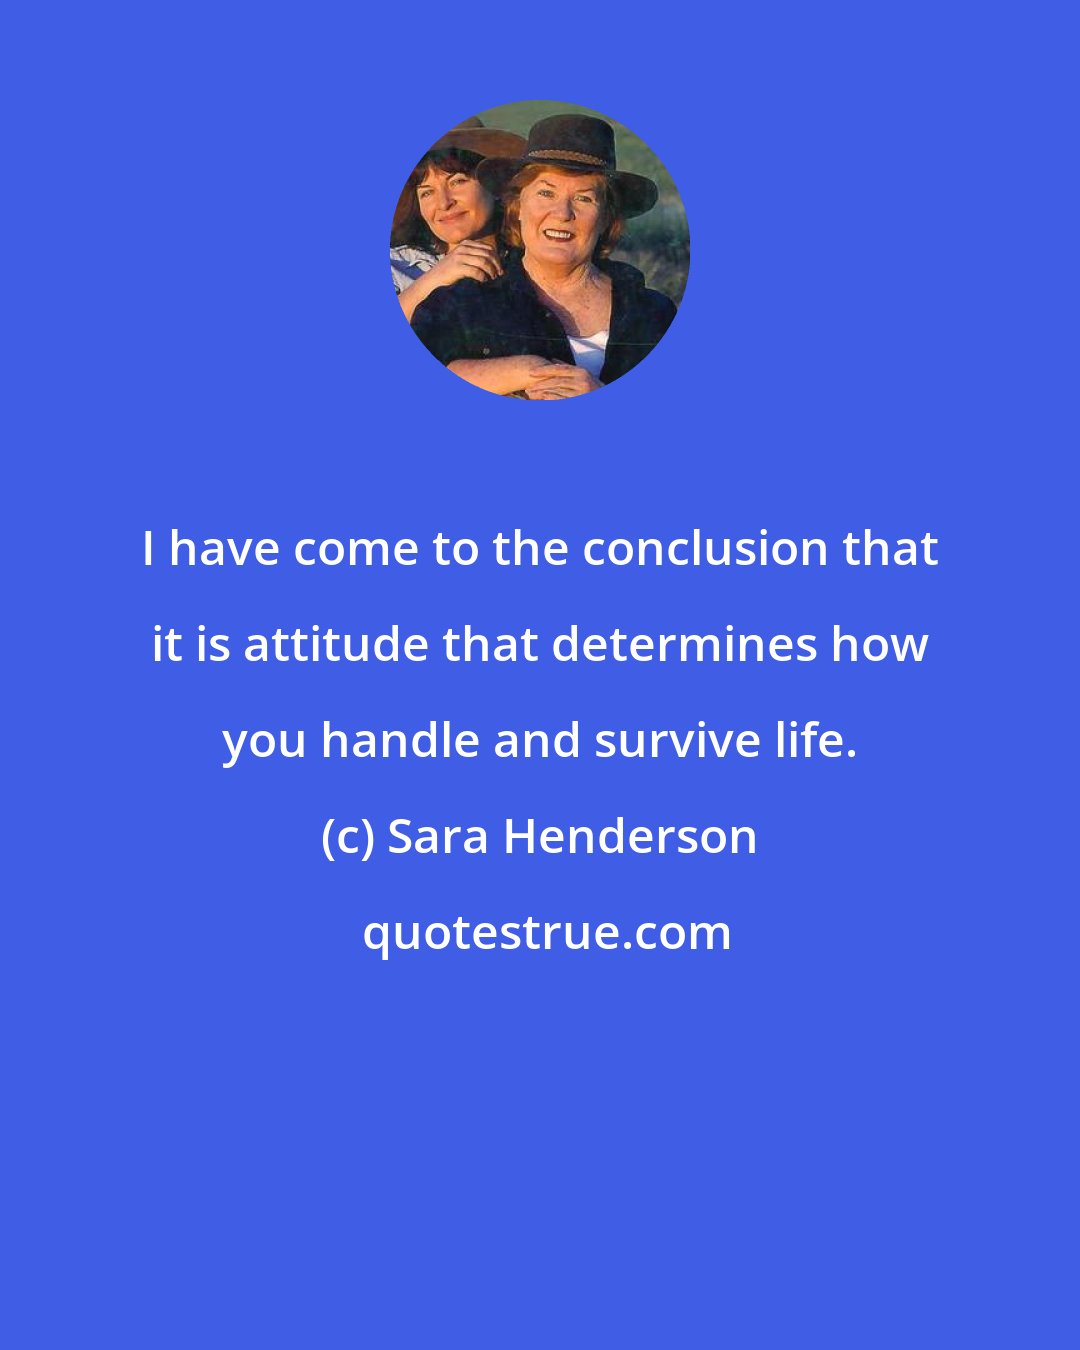 Sara Henderson: I have come to the conclusion that it is attitude that determines how you handle and survive life.